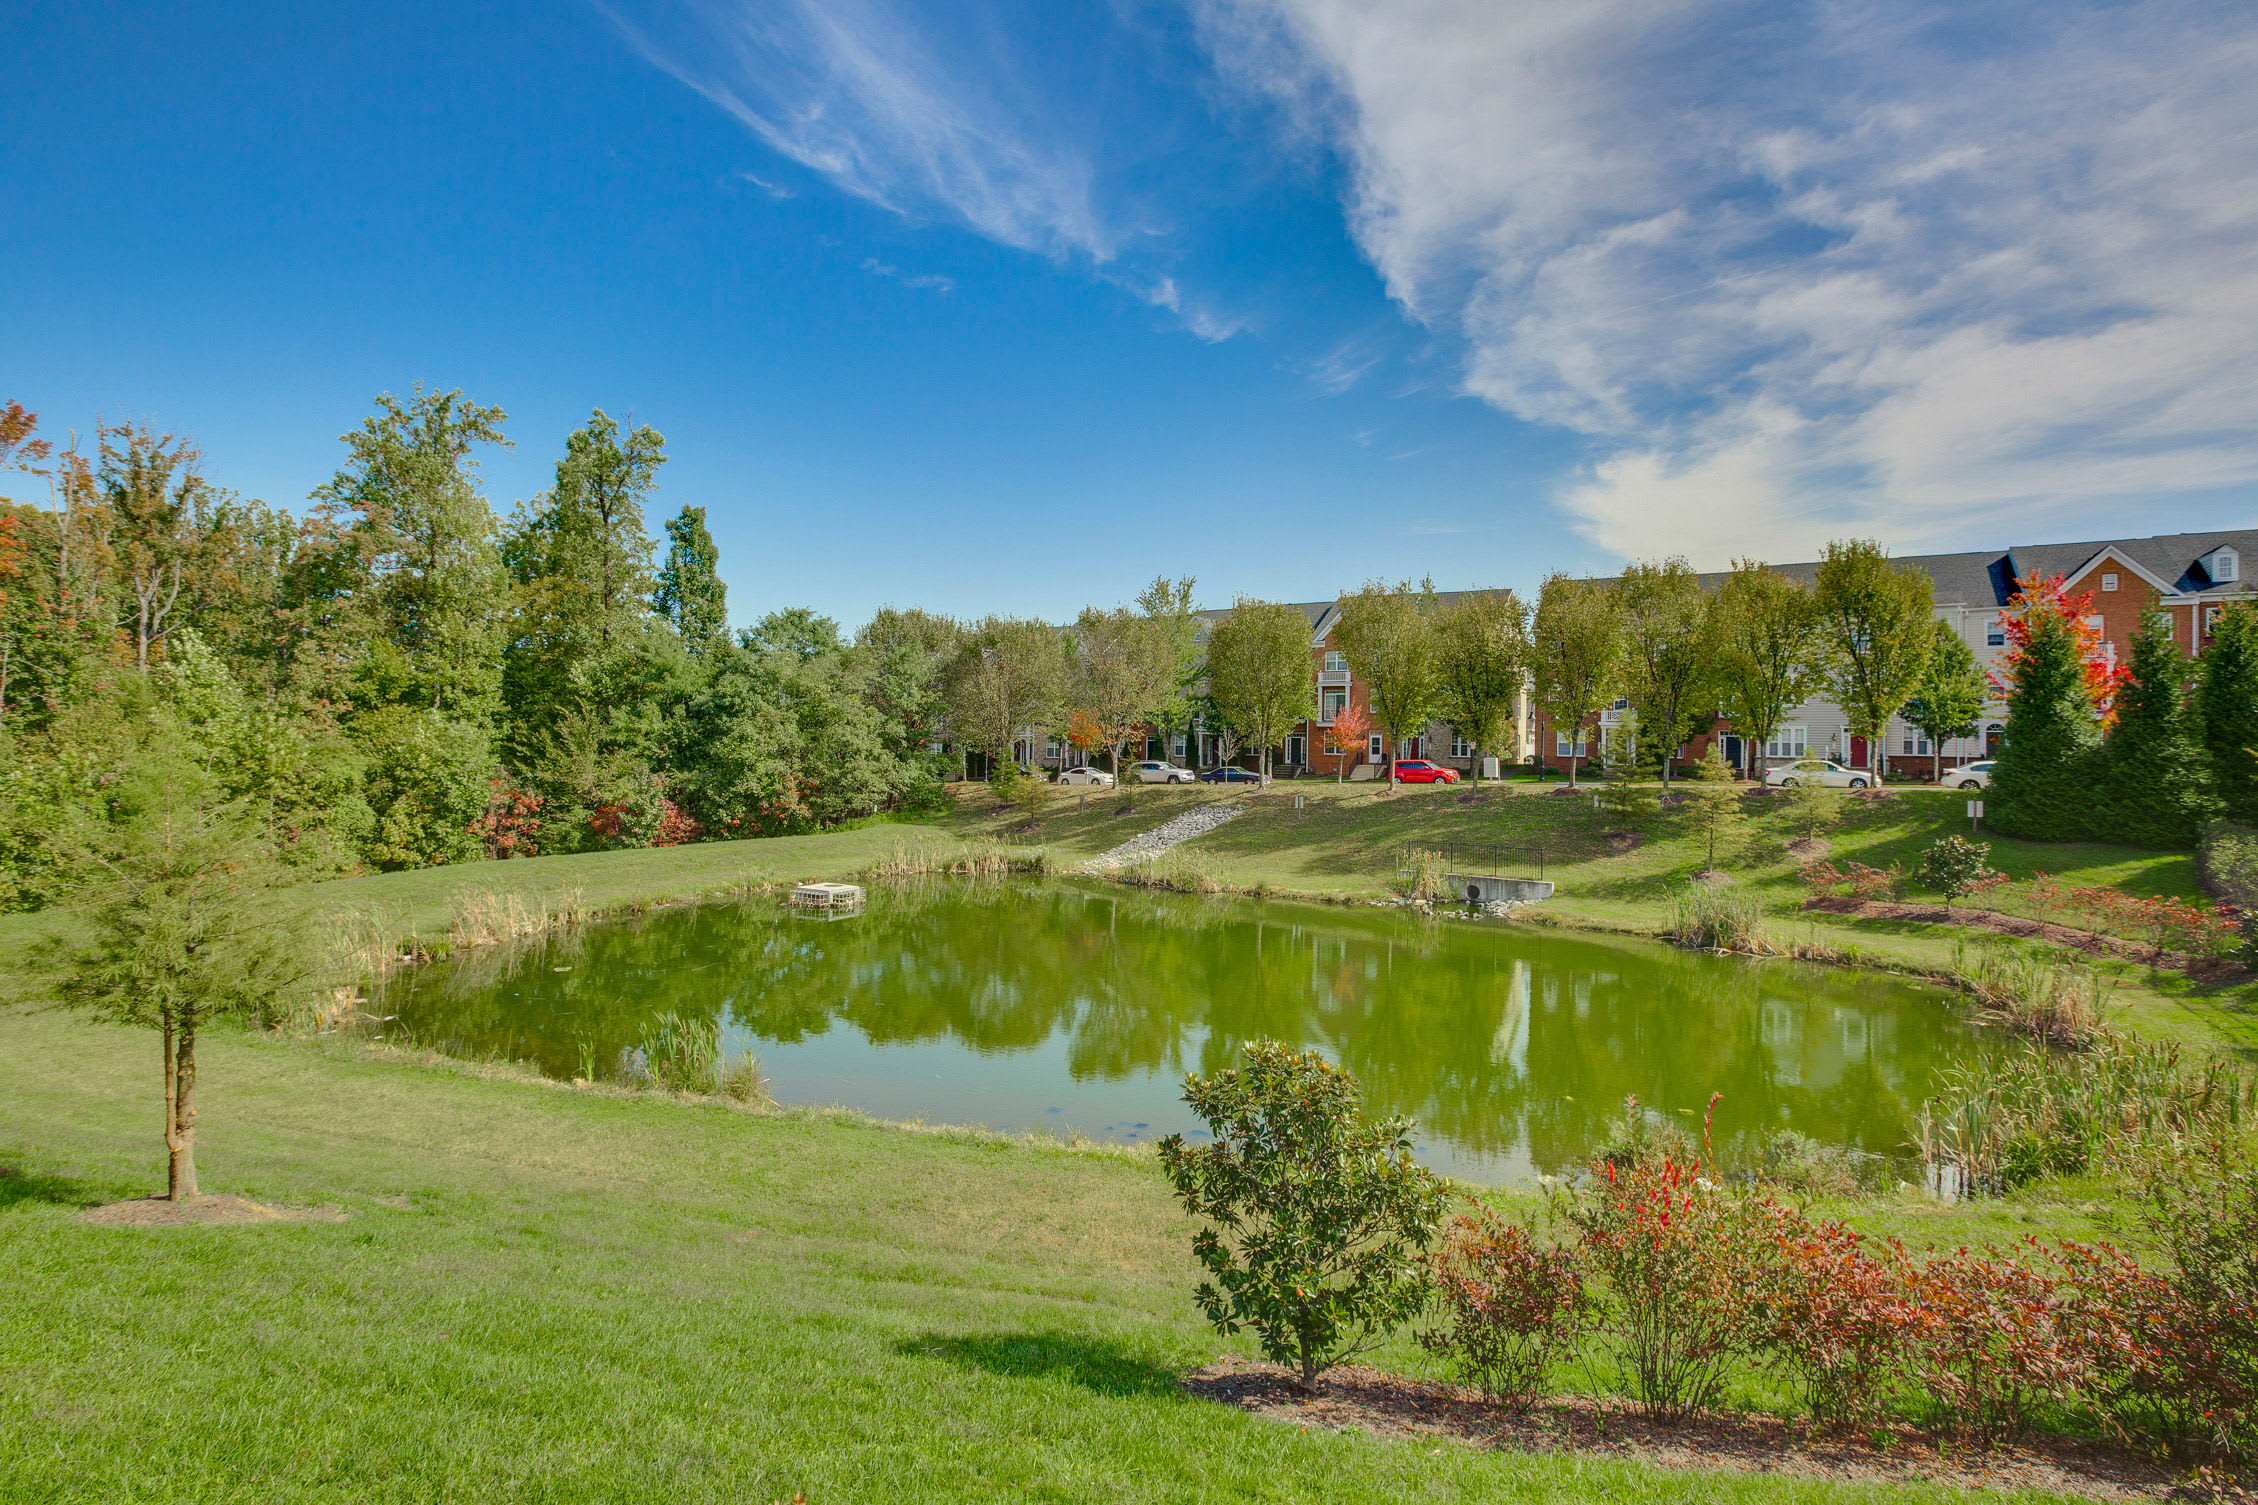 Landscaped grounds at Summerfield at Morgan Metro's clubhouse in Hyattsville, Maryland